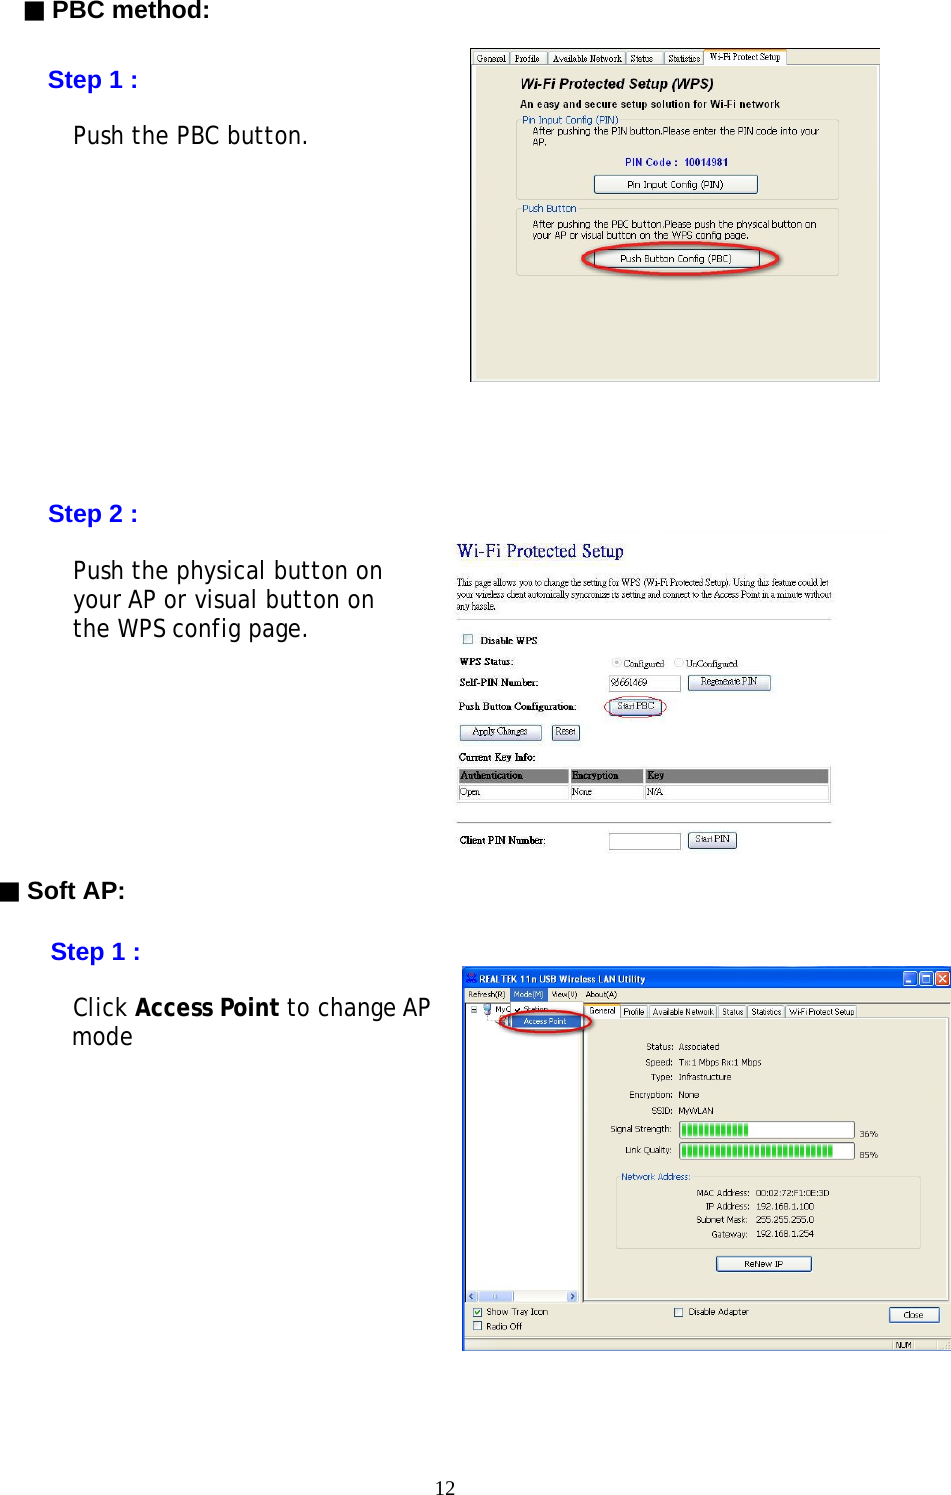 12    ▓ PBC method:      Step 1 :        Push the PBC button.                 Step 2 :  Push the physical button on               your AP or visual button on  the WPS config page.         ▓ Soft AP:  Step 1 :        Click Access Point to change AP         mode               